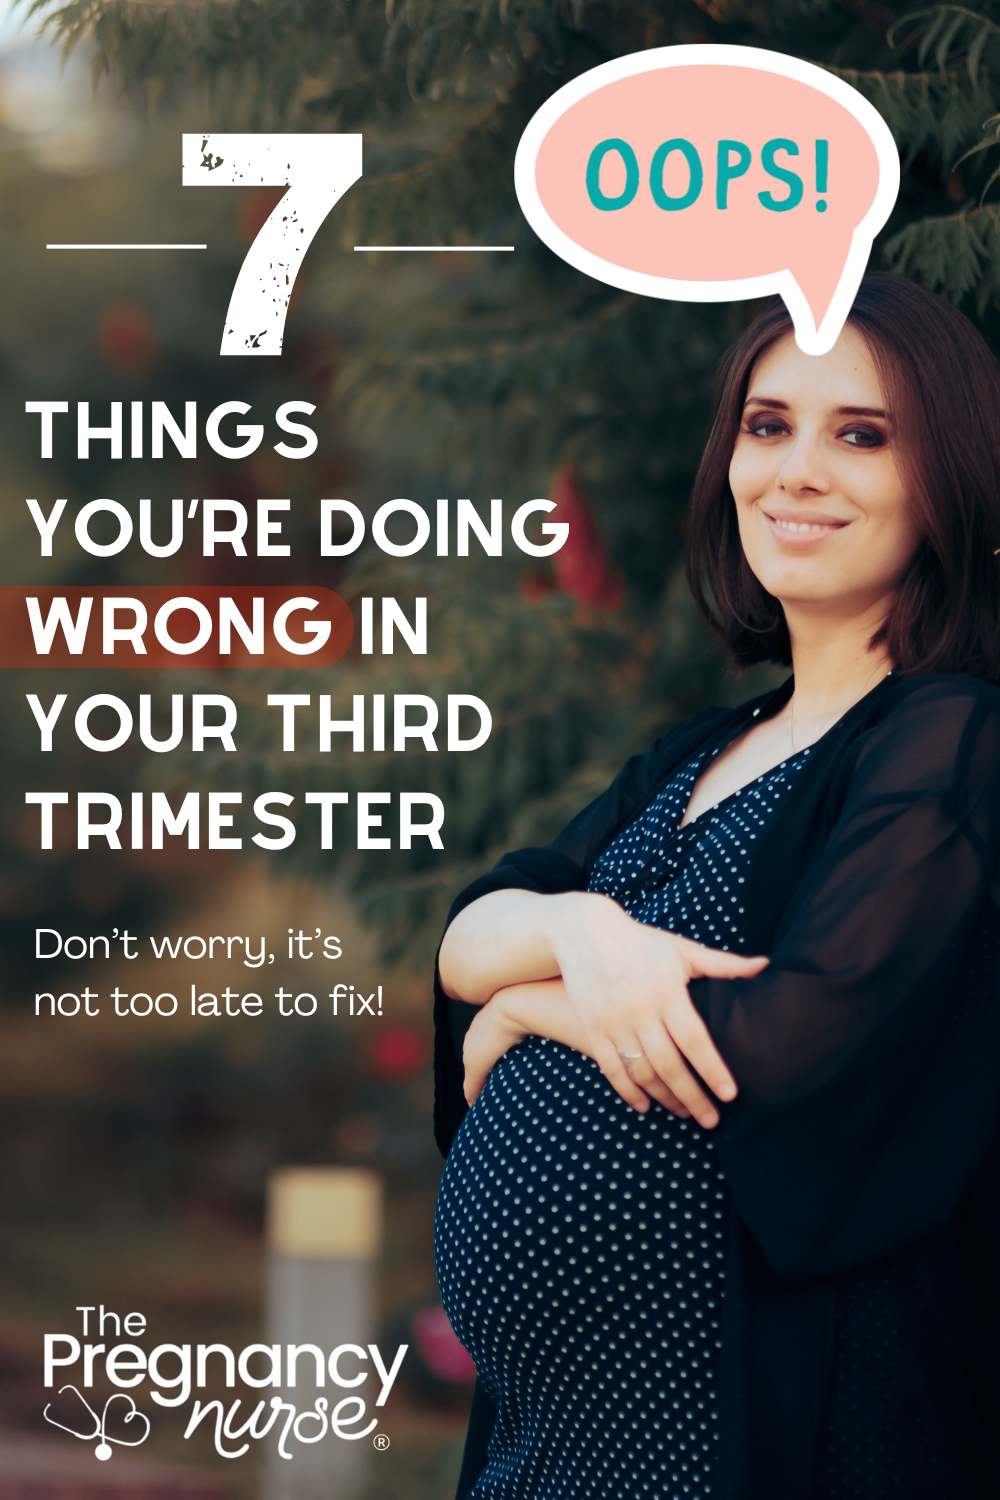 pregnant woman standing saying "oops" // 7 things you're doing WRONG in your third trimester -- don't worry, it's not too late to fix!